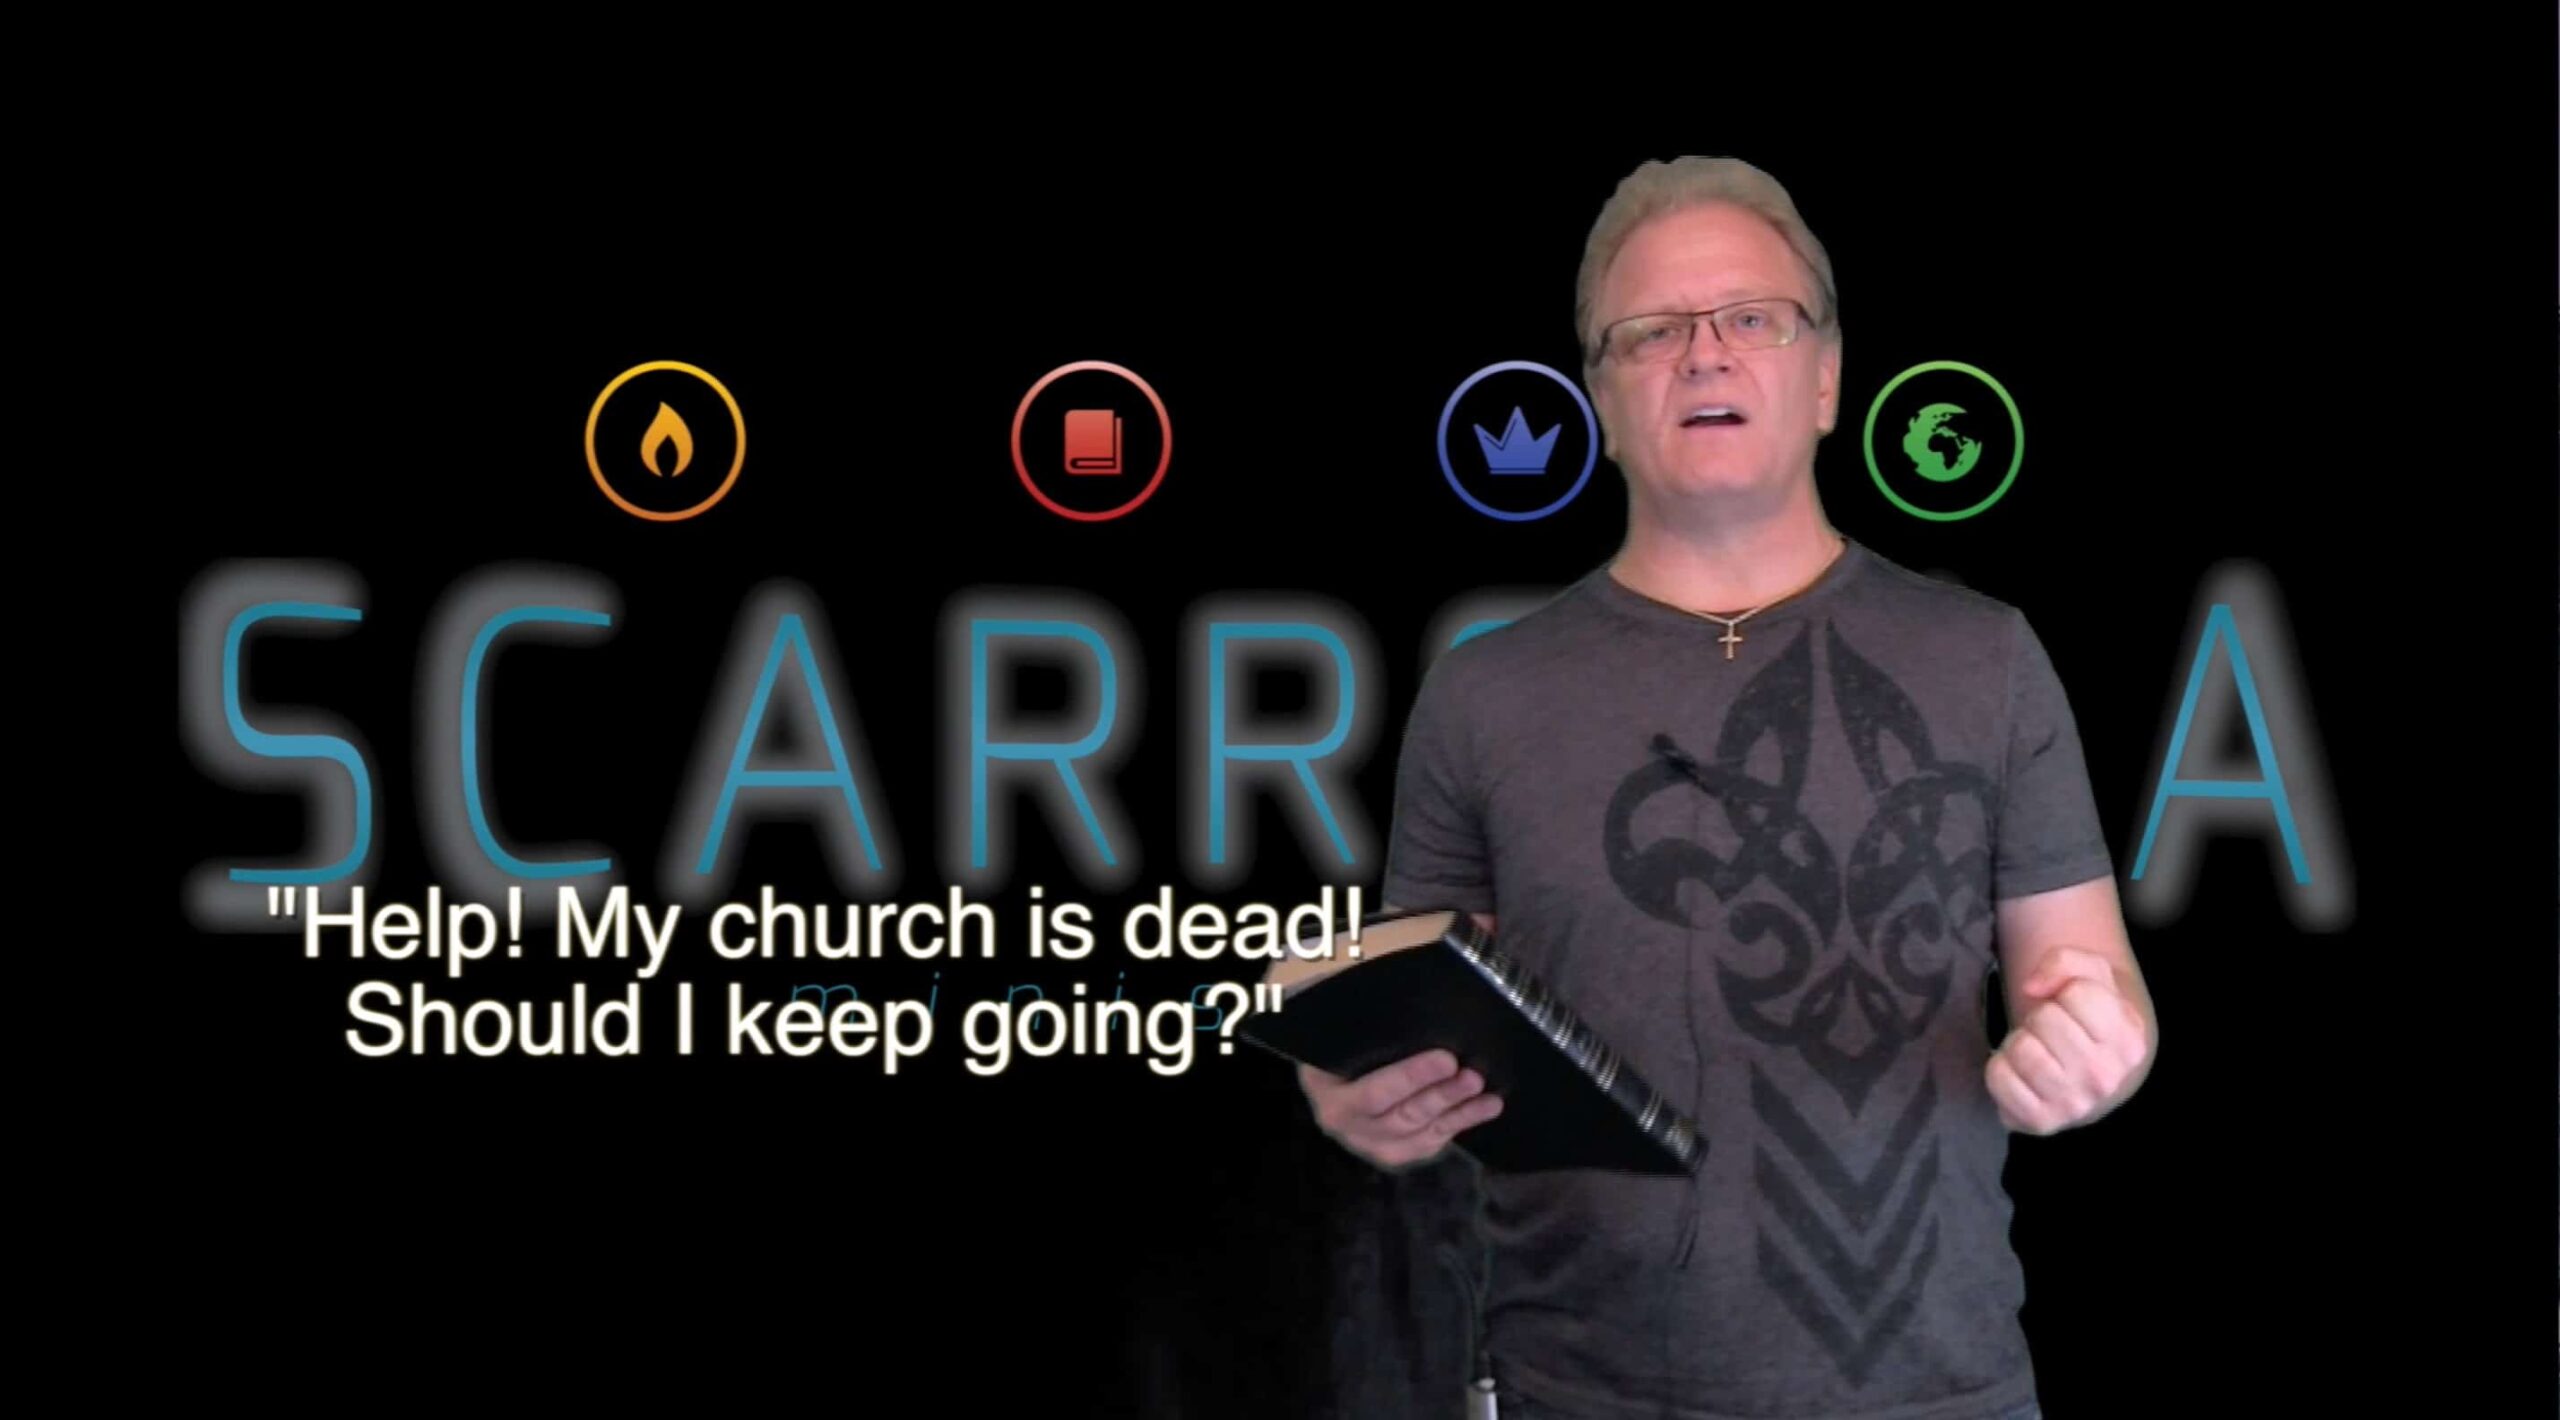 HELP! MY CHURCH IS DEAD, DO I NEED TO KEEP GOING ?